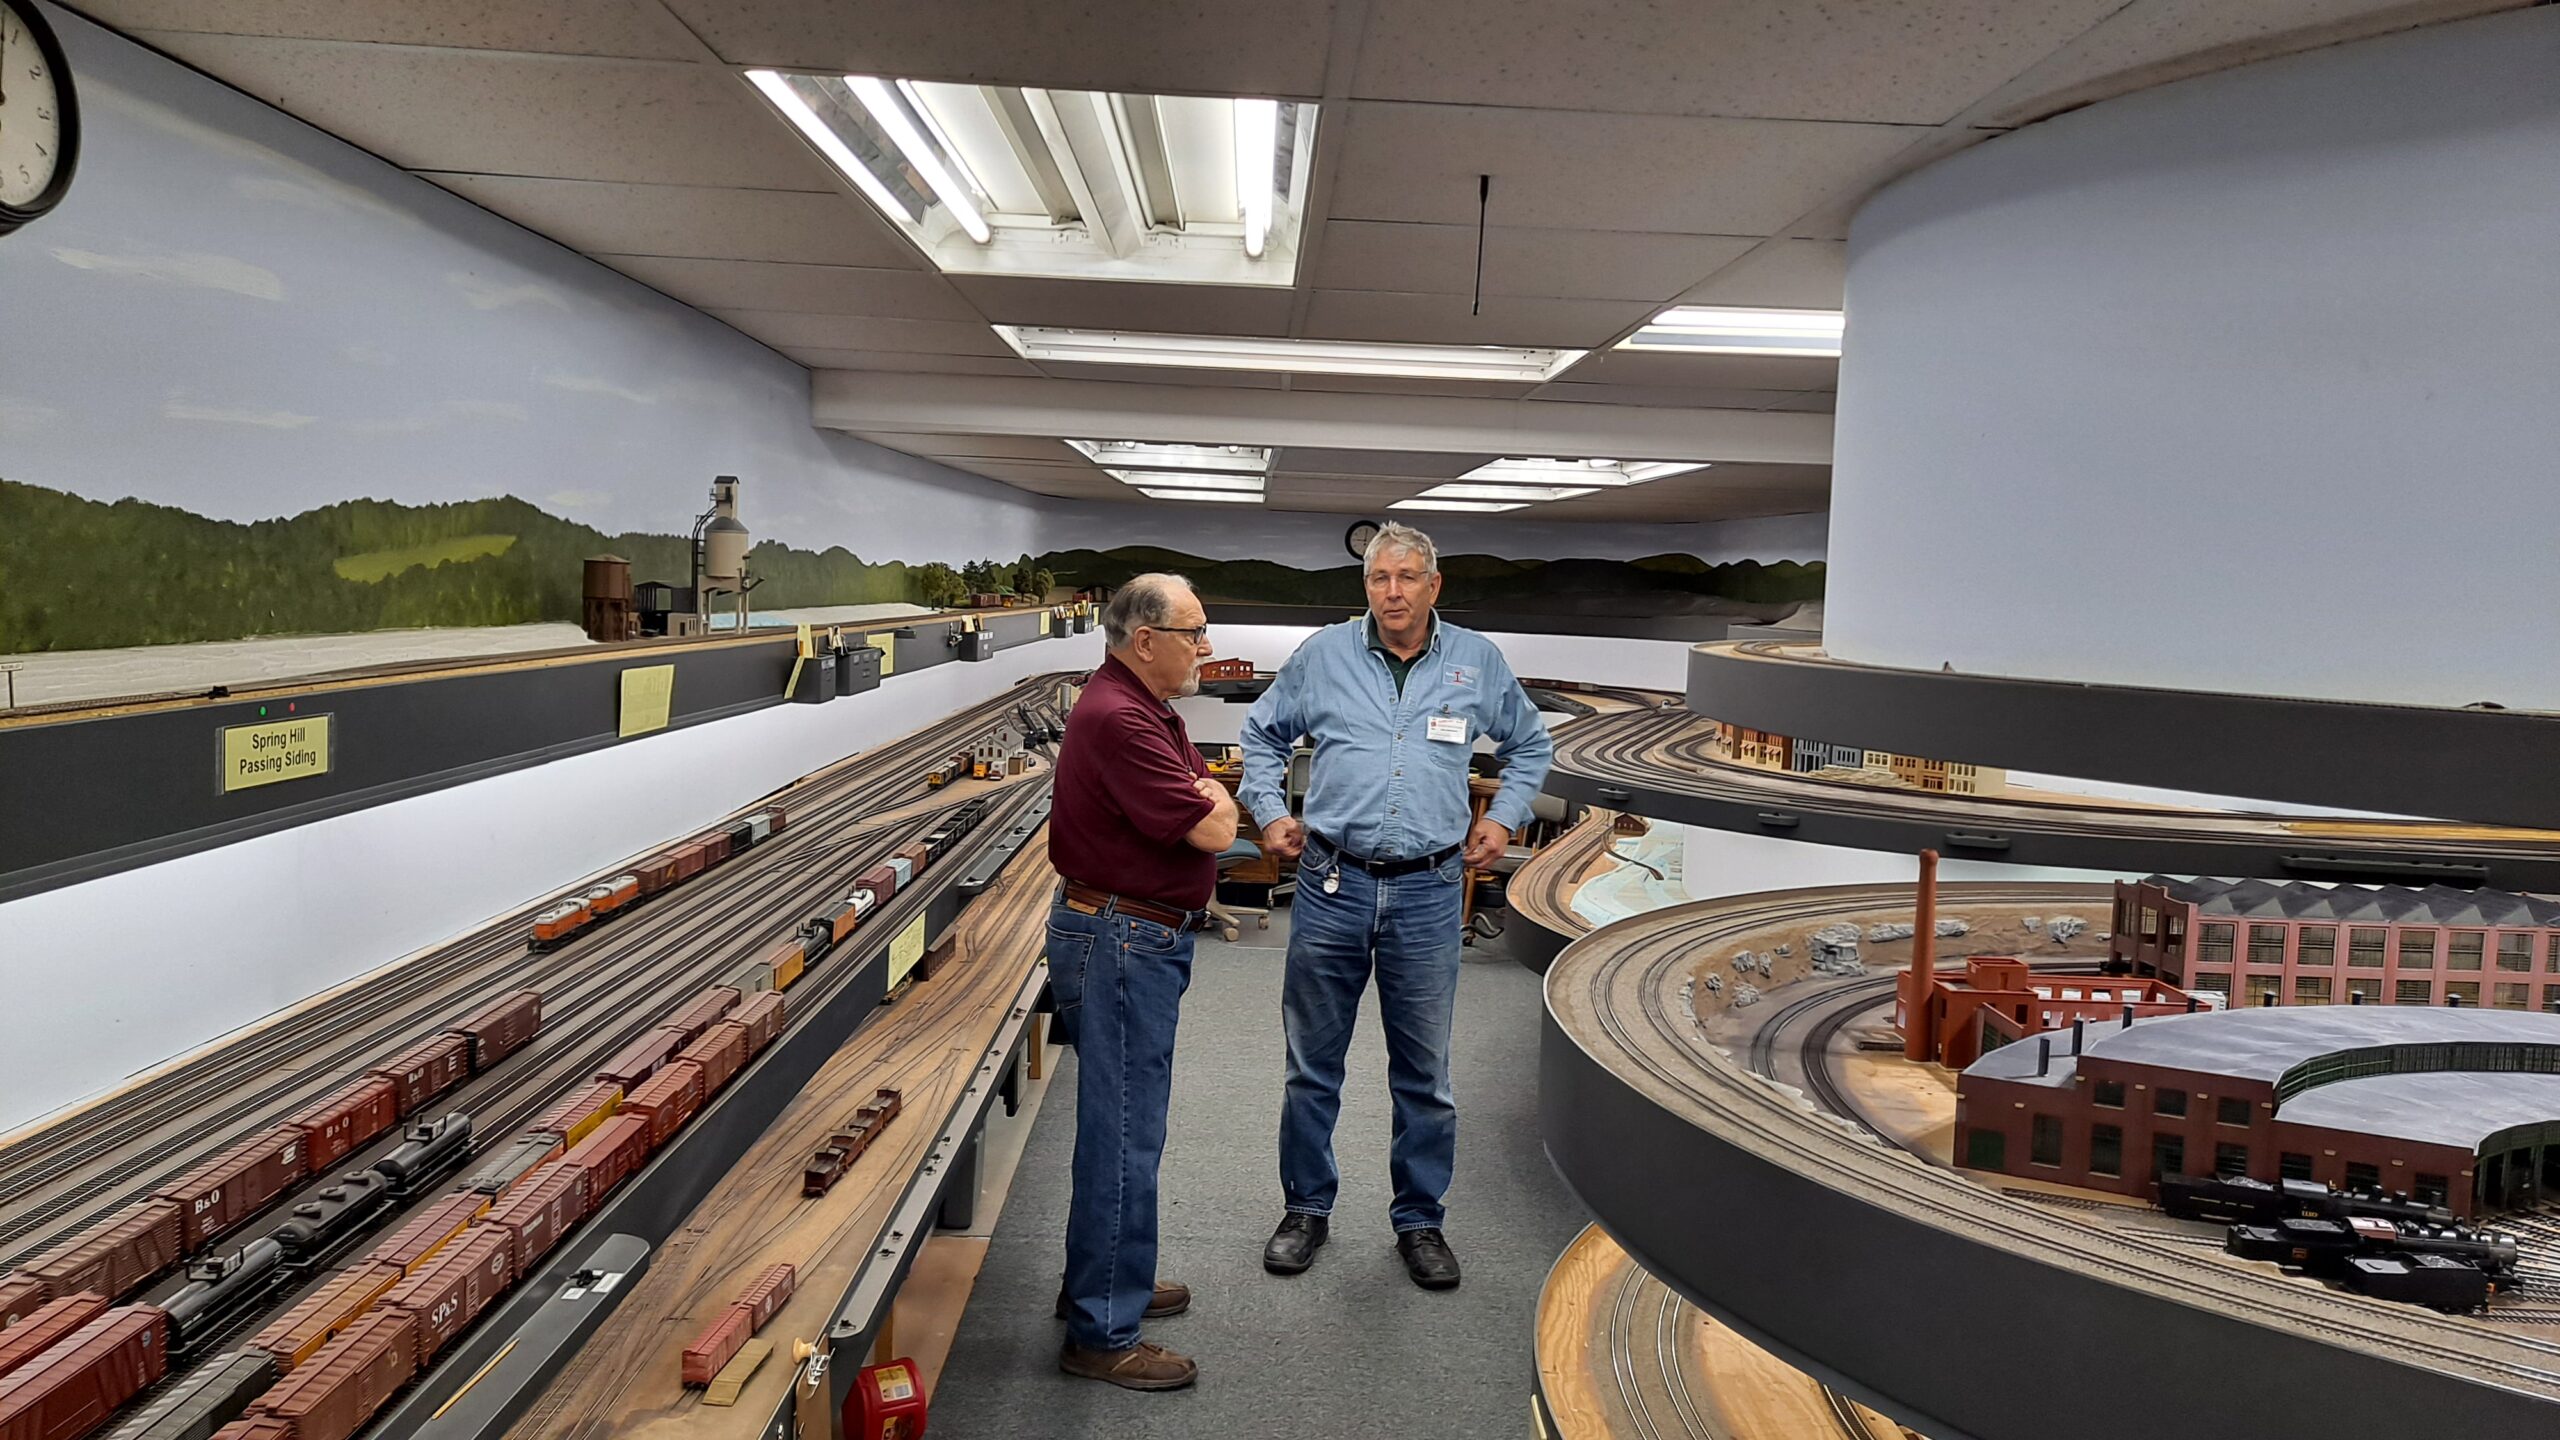 Two men talk at the intersection of two aisles of a double-deck model railroad.